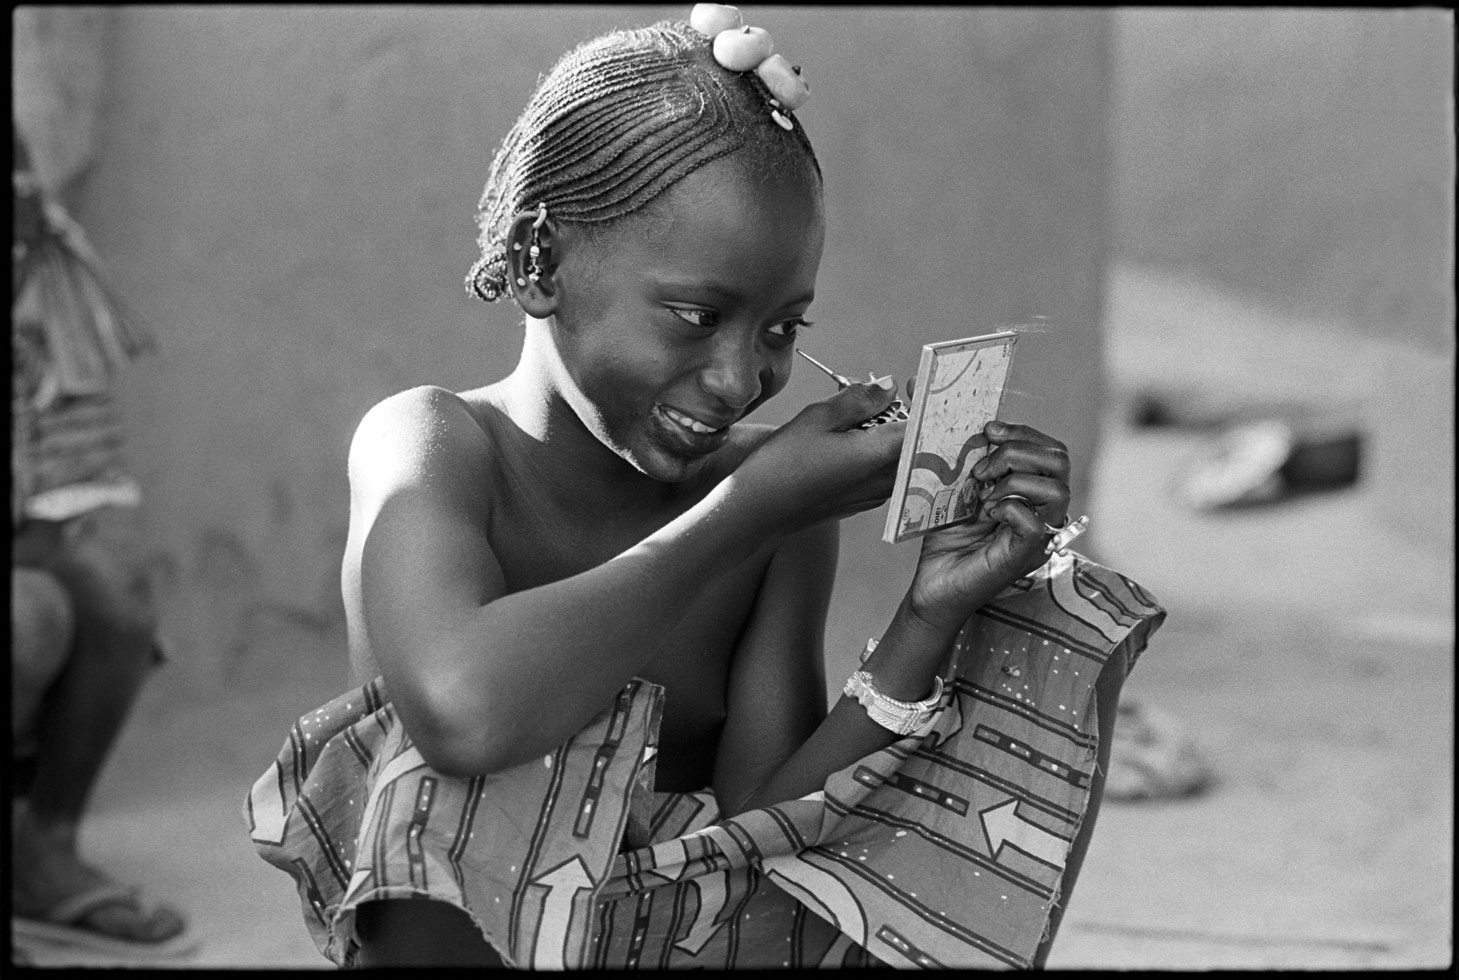 "The world is a mirror; it looks at you the same way you look at it." North African proverb

This young Peul girl prepares for the annual 'Crossing of the Cattle' Festival which takes place along the Niger River. The festival is a celebration of the return of the cattle herders who spent the dry season searching for food for the cattle. The return of the men symbolizes their having attained manhood.

Diafarabé, Mali, 1994